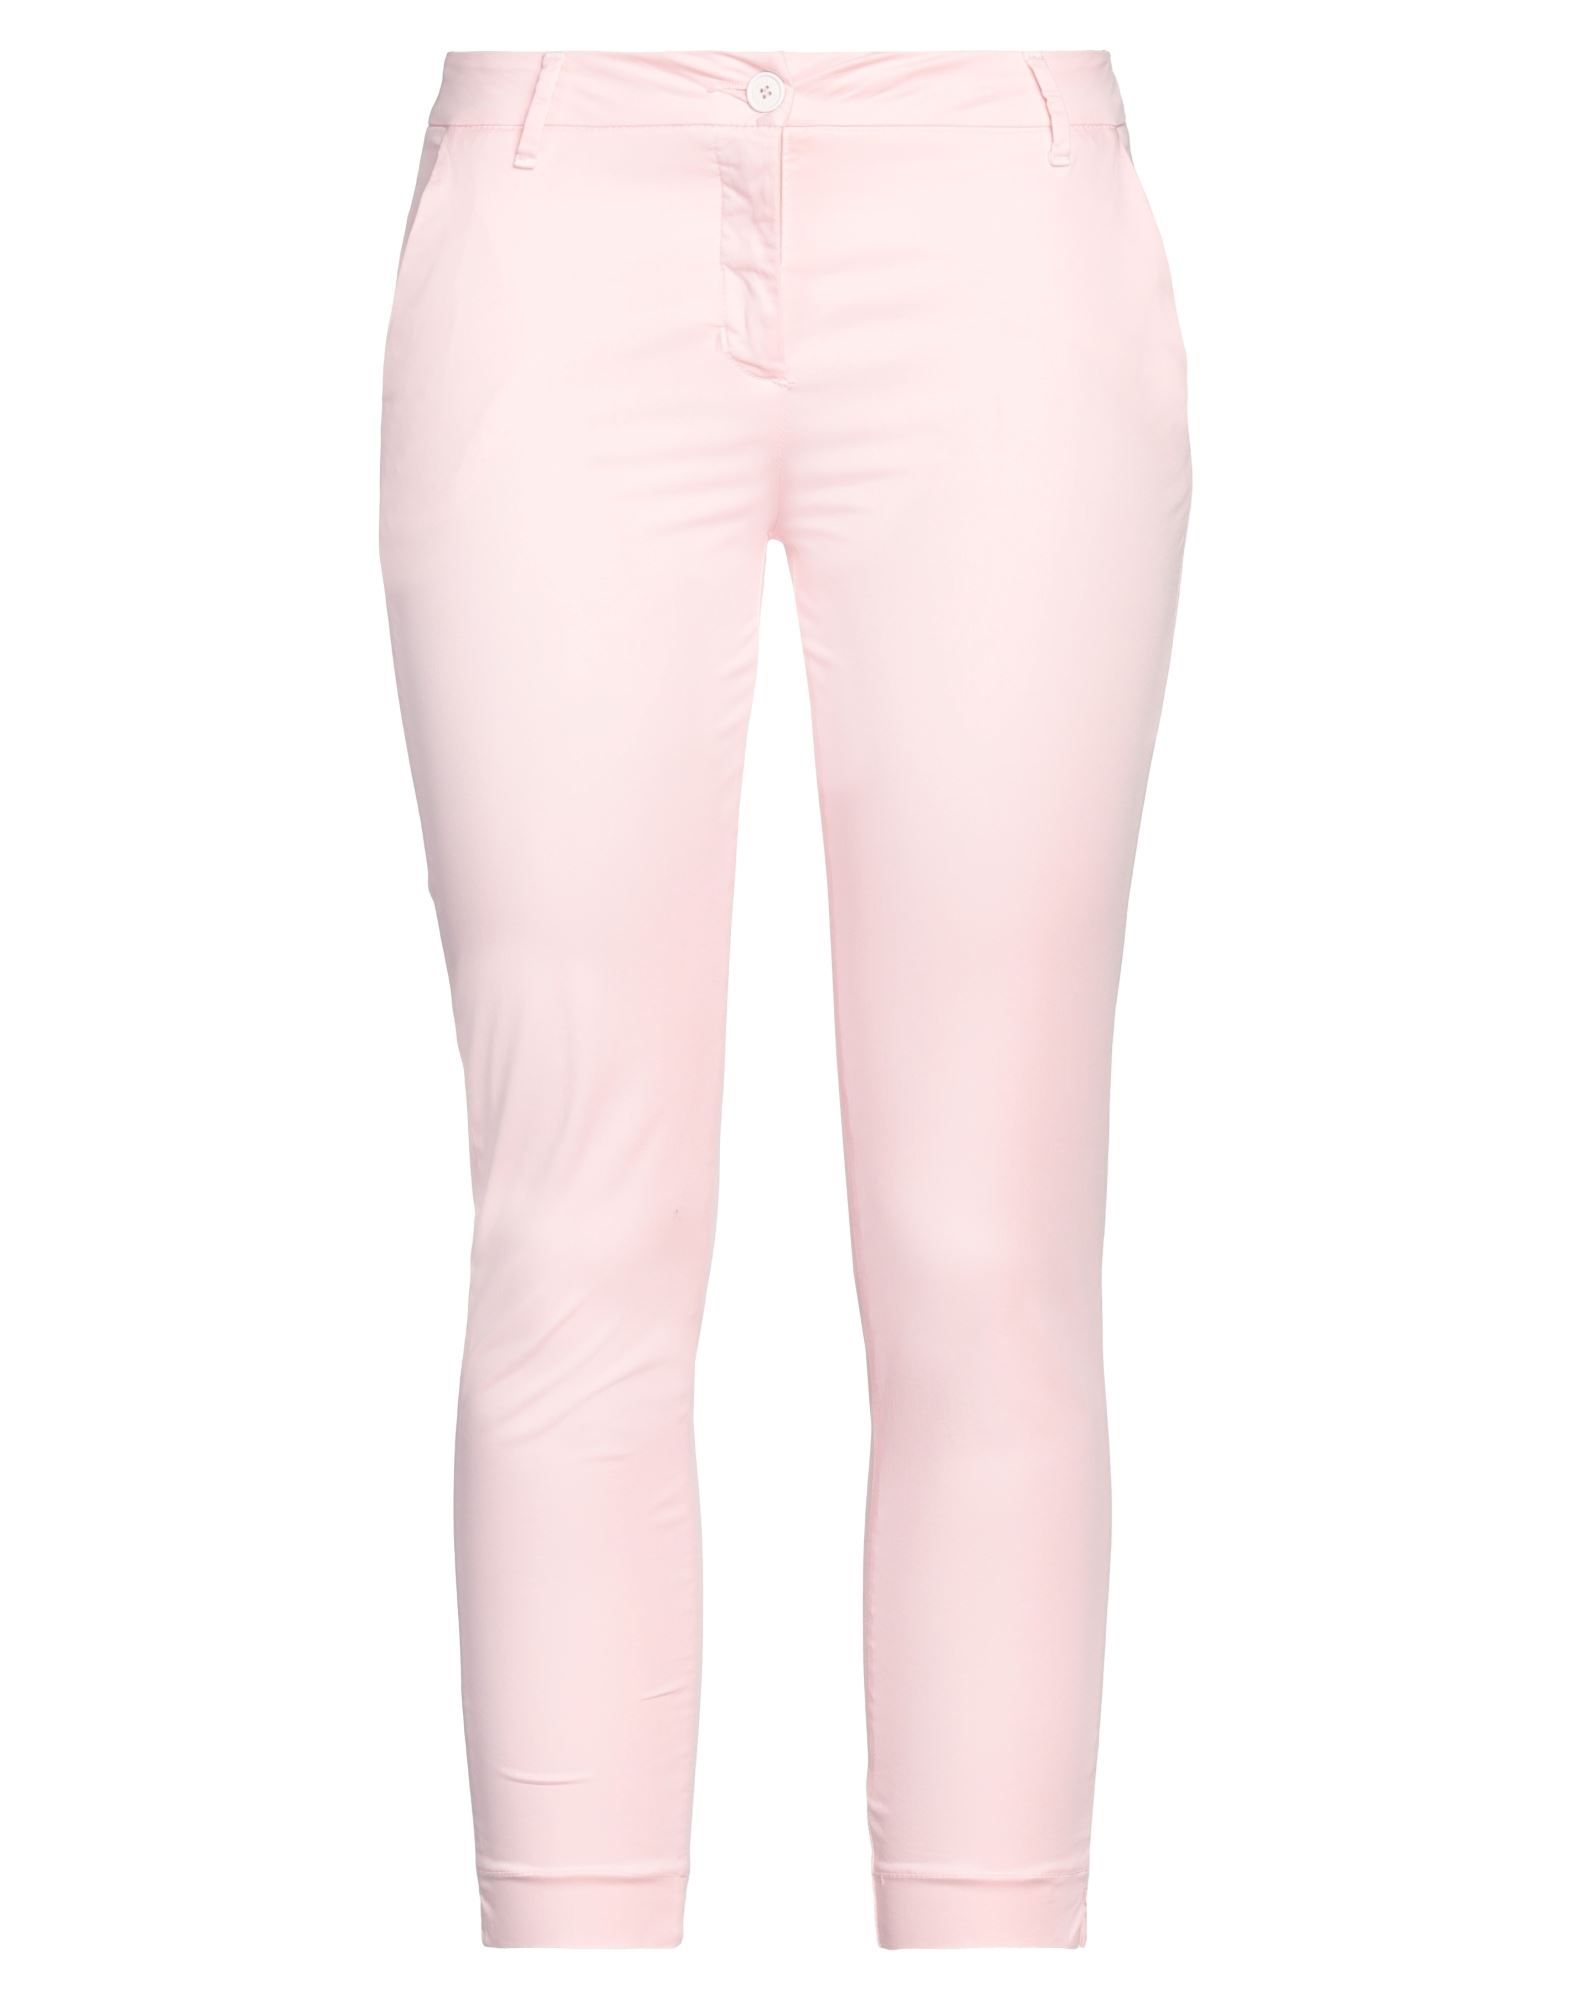 White Wise Pants In Pink